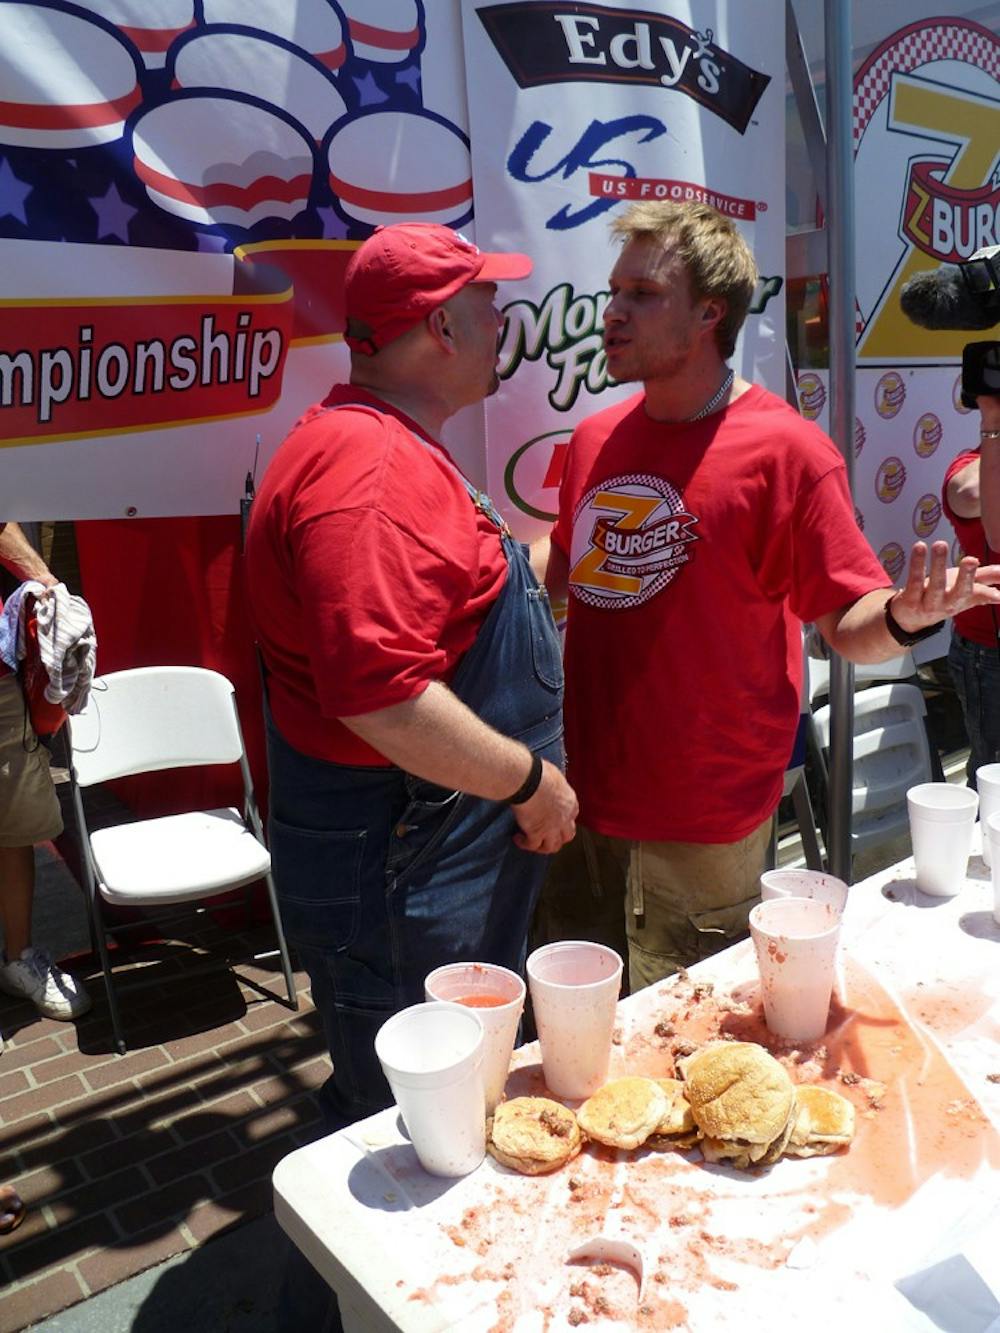 Tenley\'s Z-Burger really got things cooking this Independence Day weekend with their burger eating competition. One of AU\'s own placed fourth after scarfing down 17 burgers.